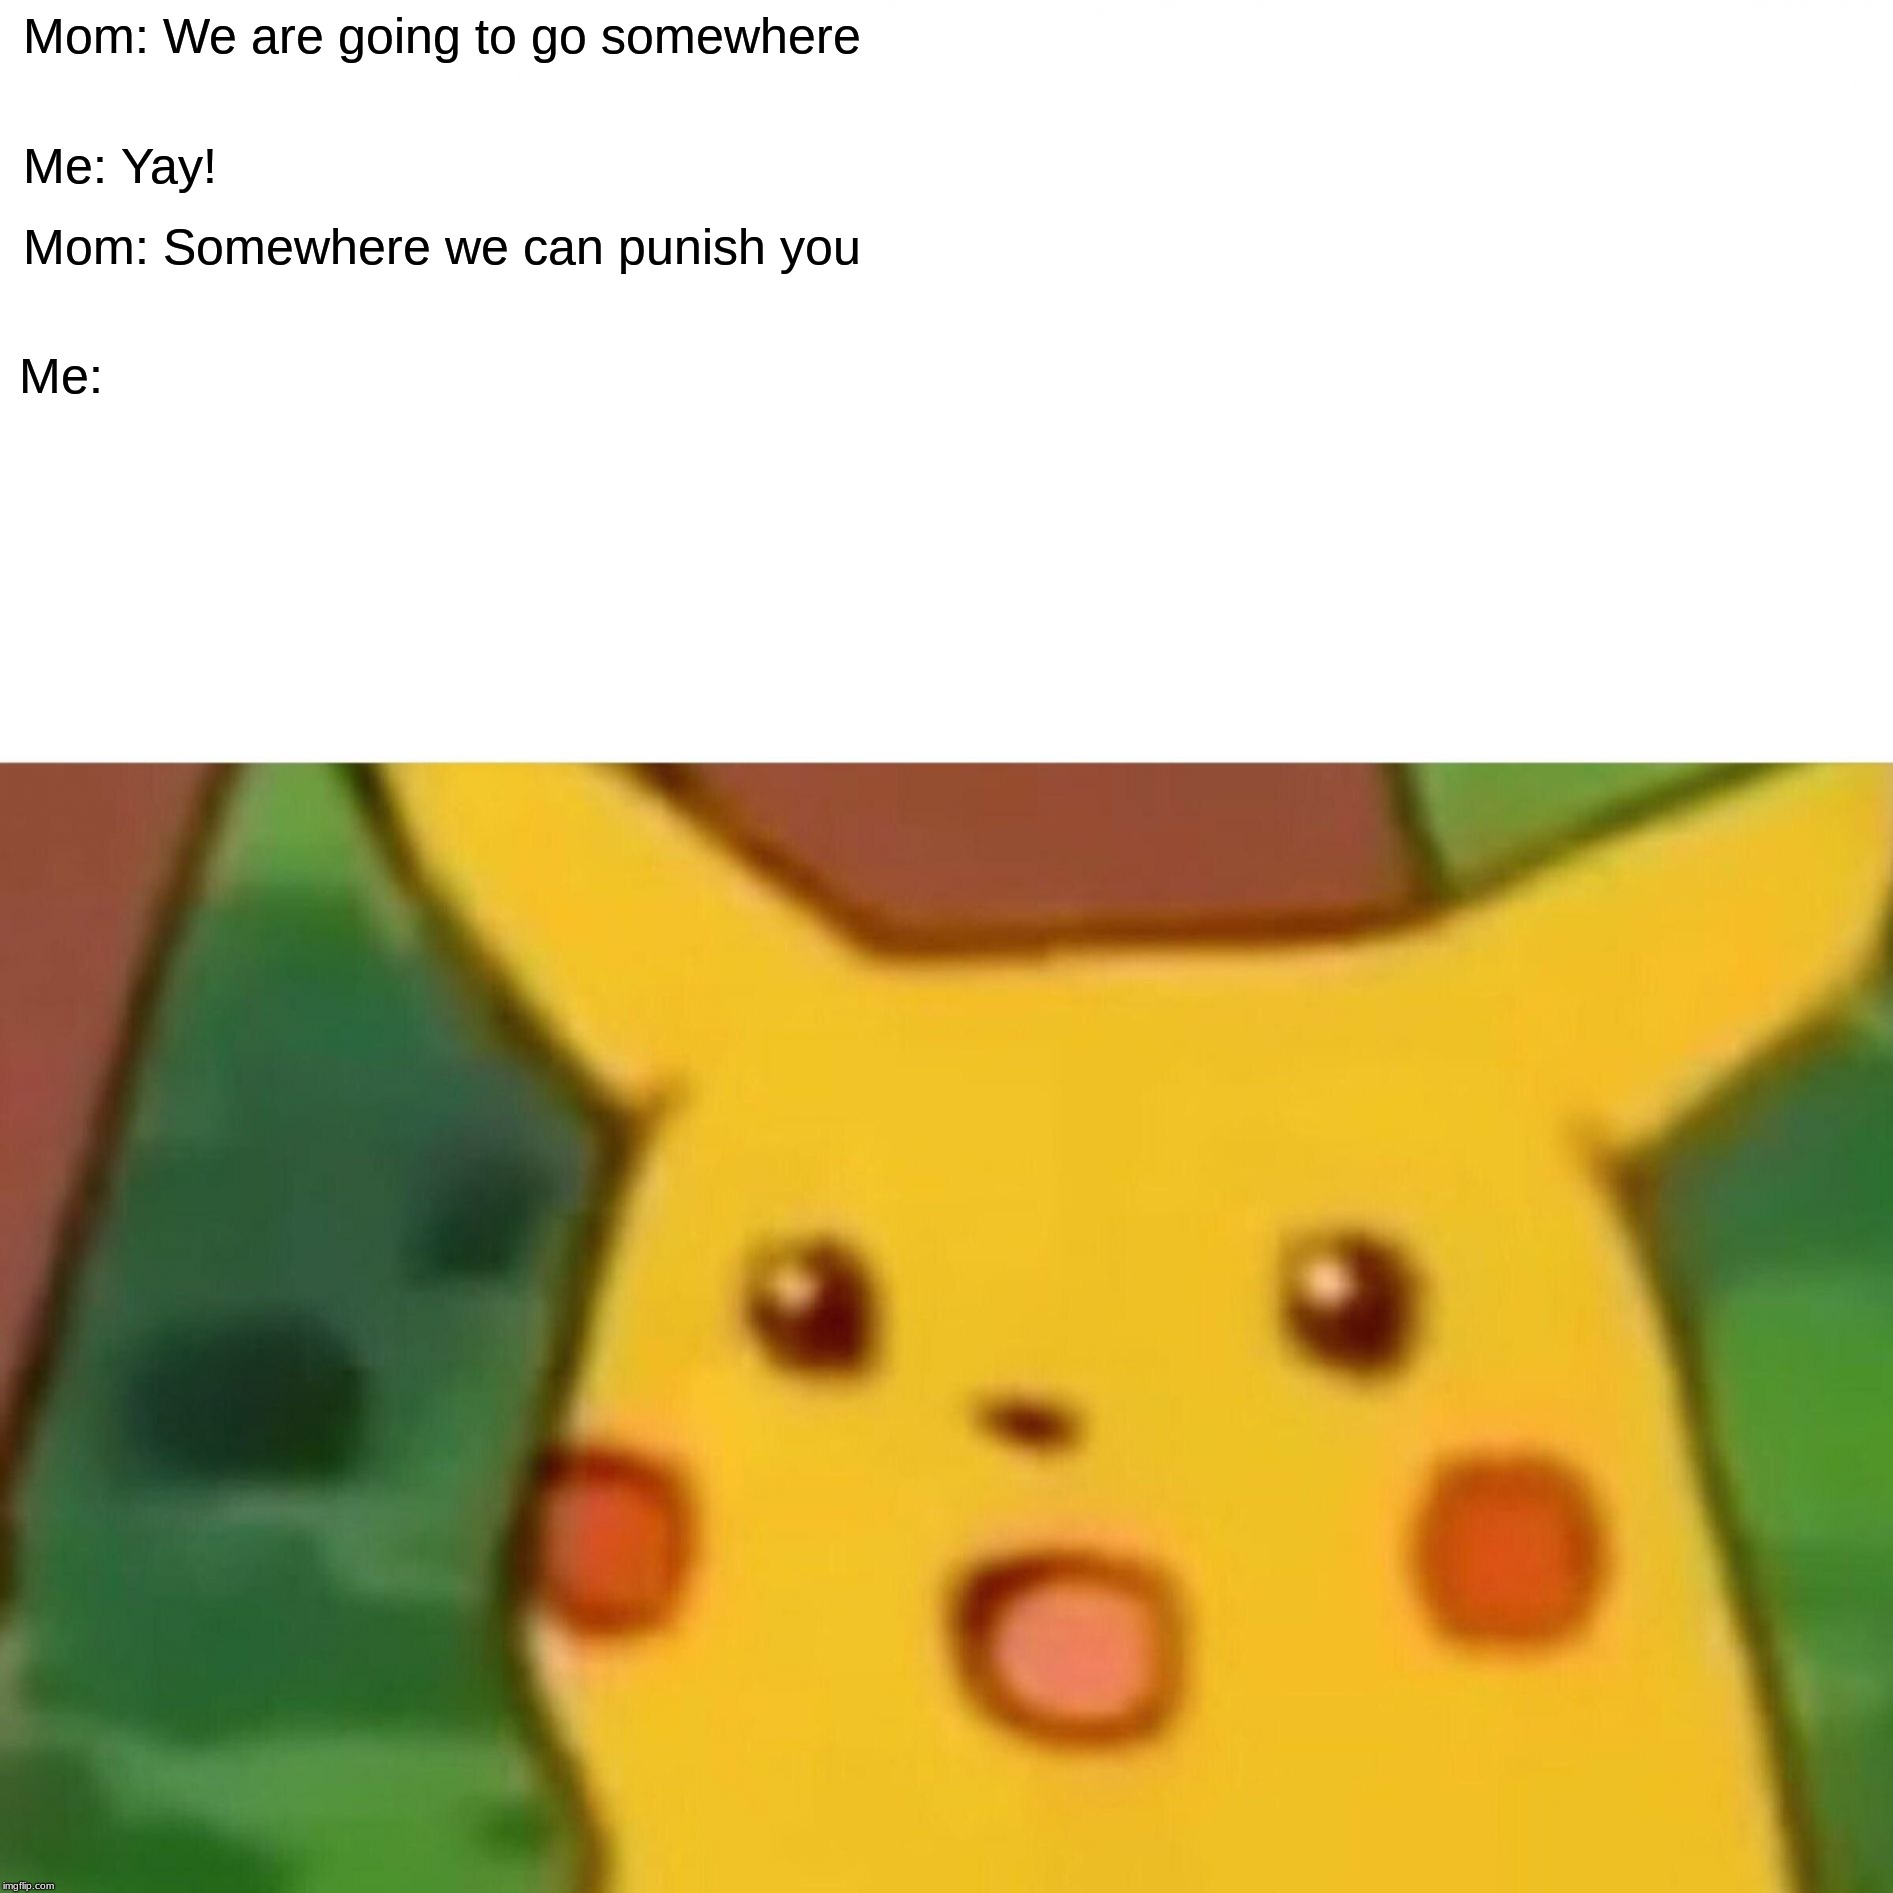 Surprised Pikachu | Mom: We are going to go somewhere; Me: Yay! Mom: Somewhere we can punish you; Me: | image tagged in memes,surprised pikachu | made w/ Imgflip meme maker